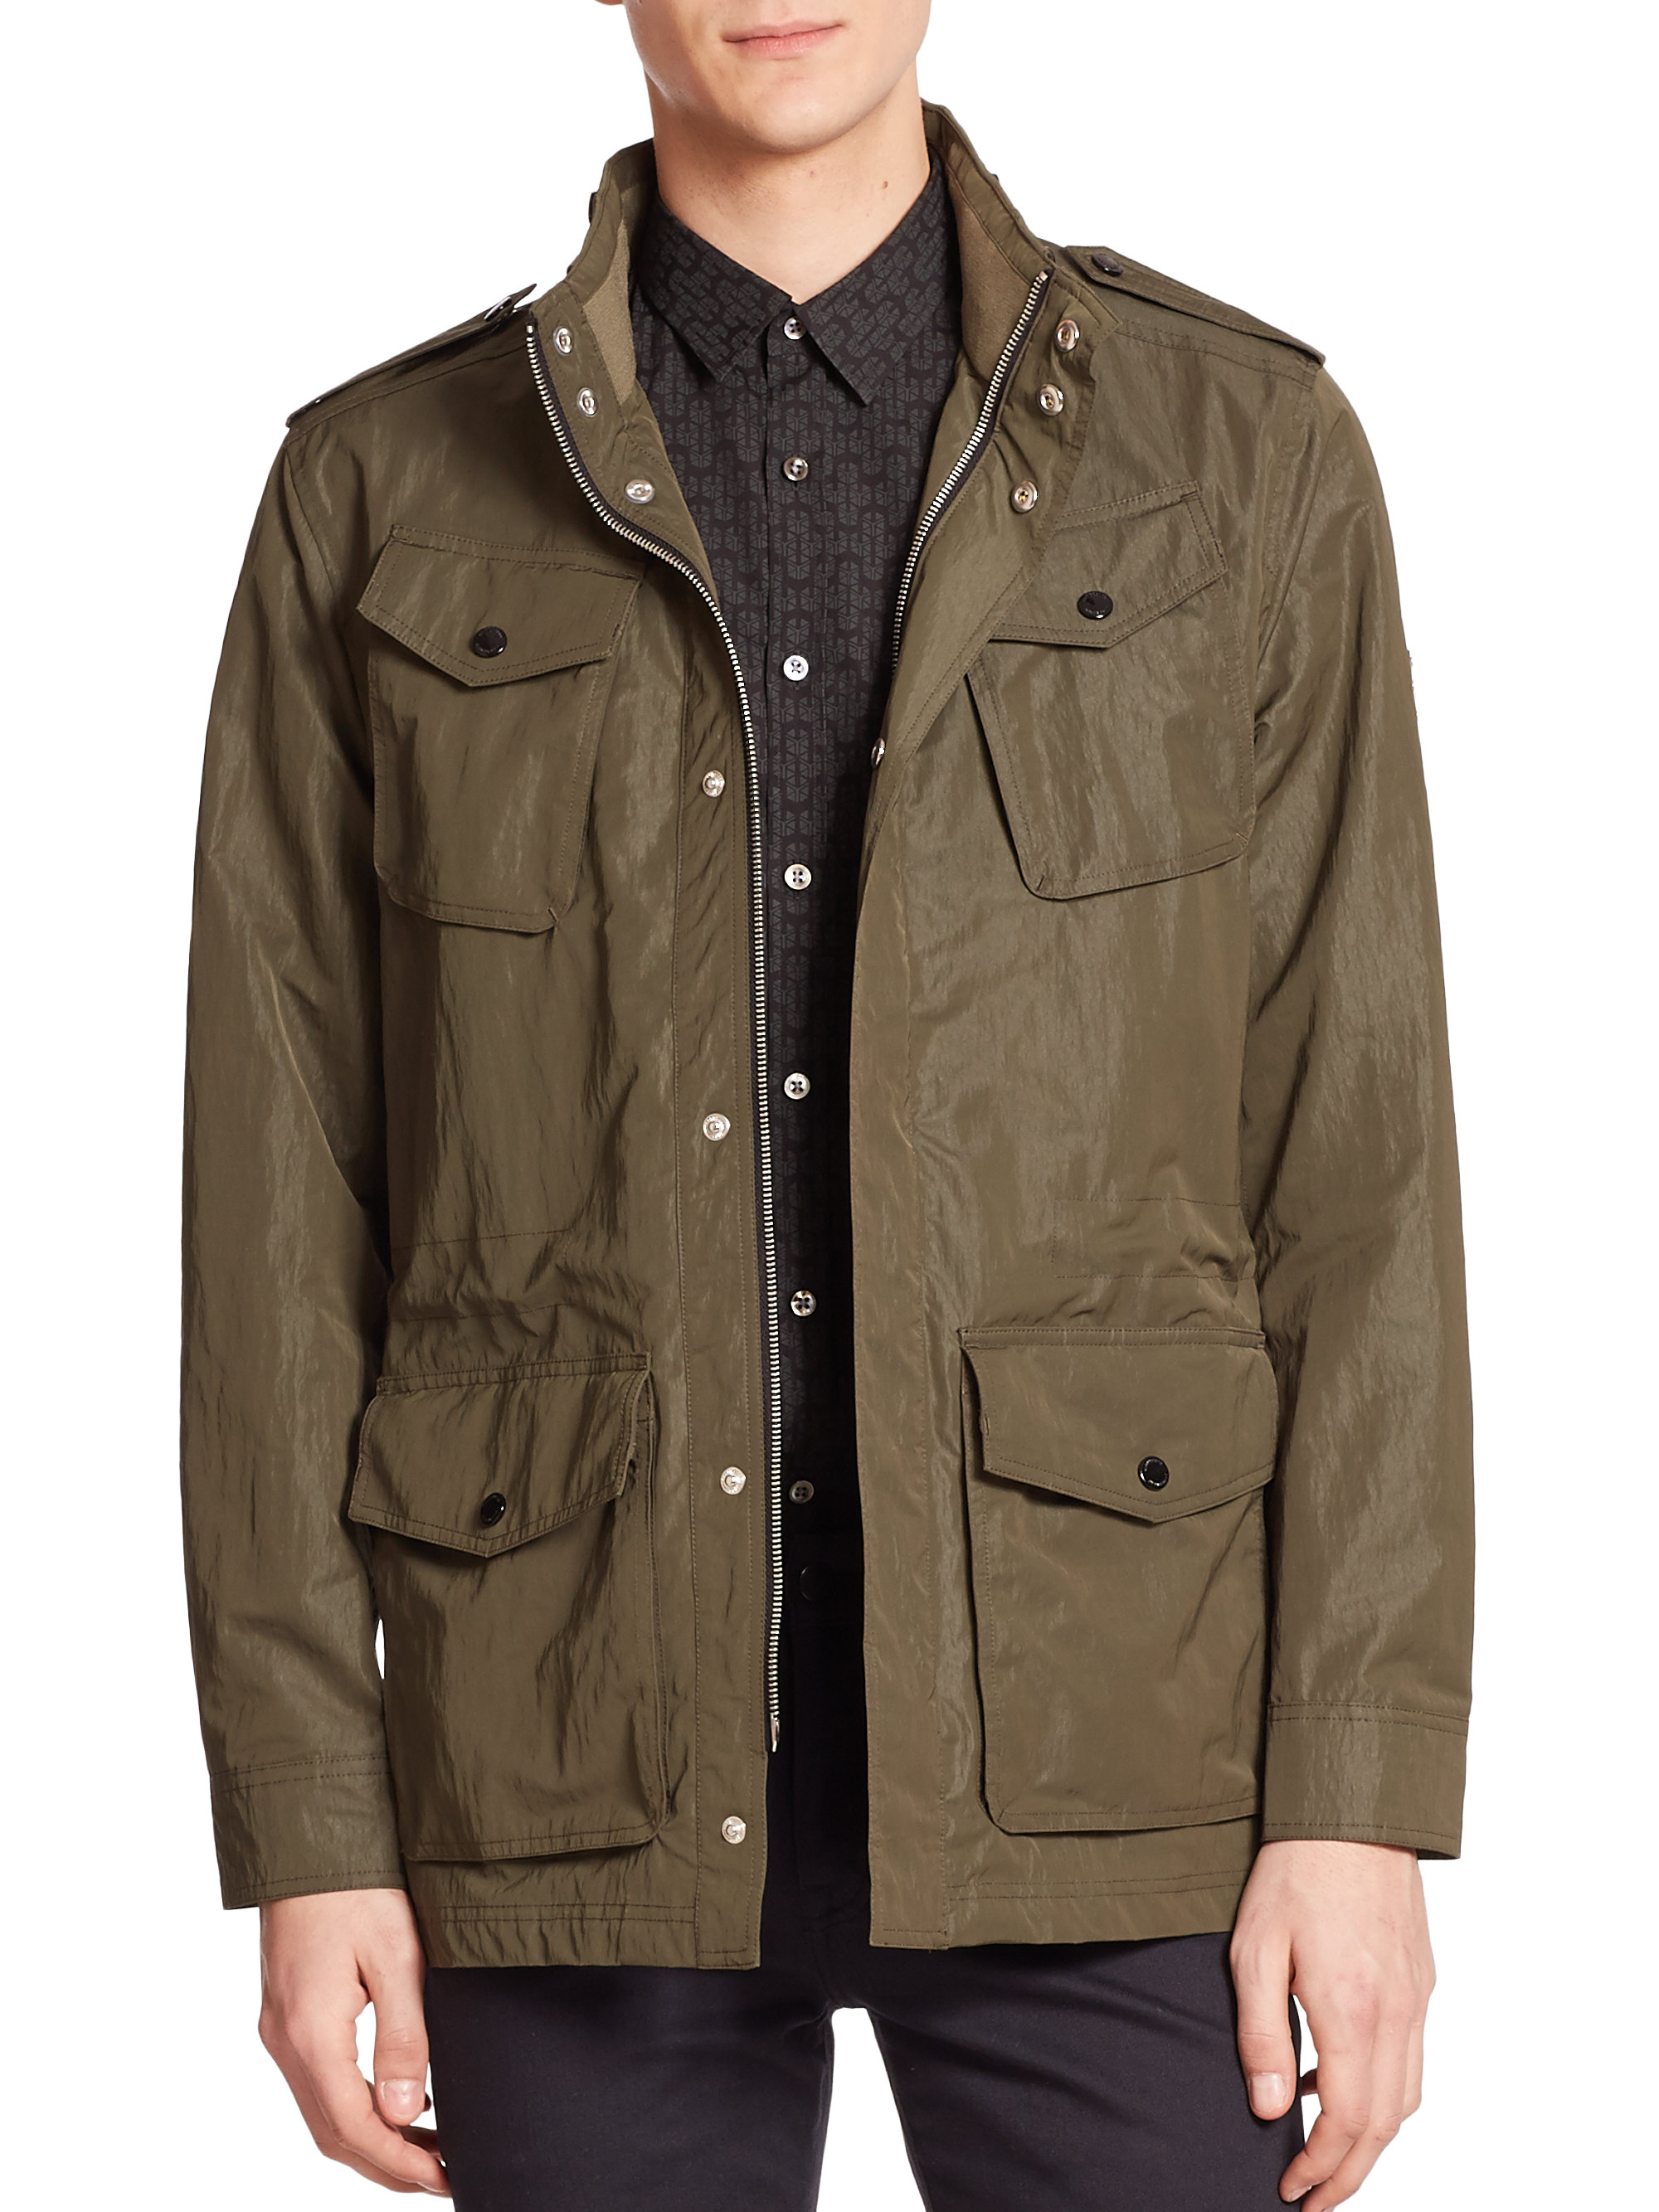 Lyst - J.Lindeberg Water-repellent Military Jacket in Green for Men